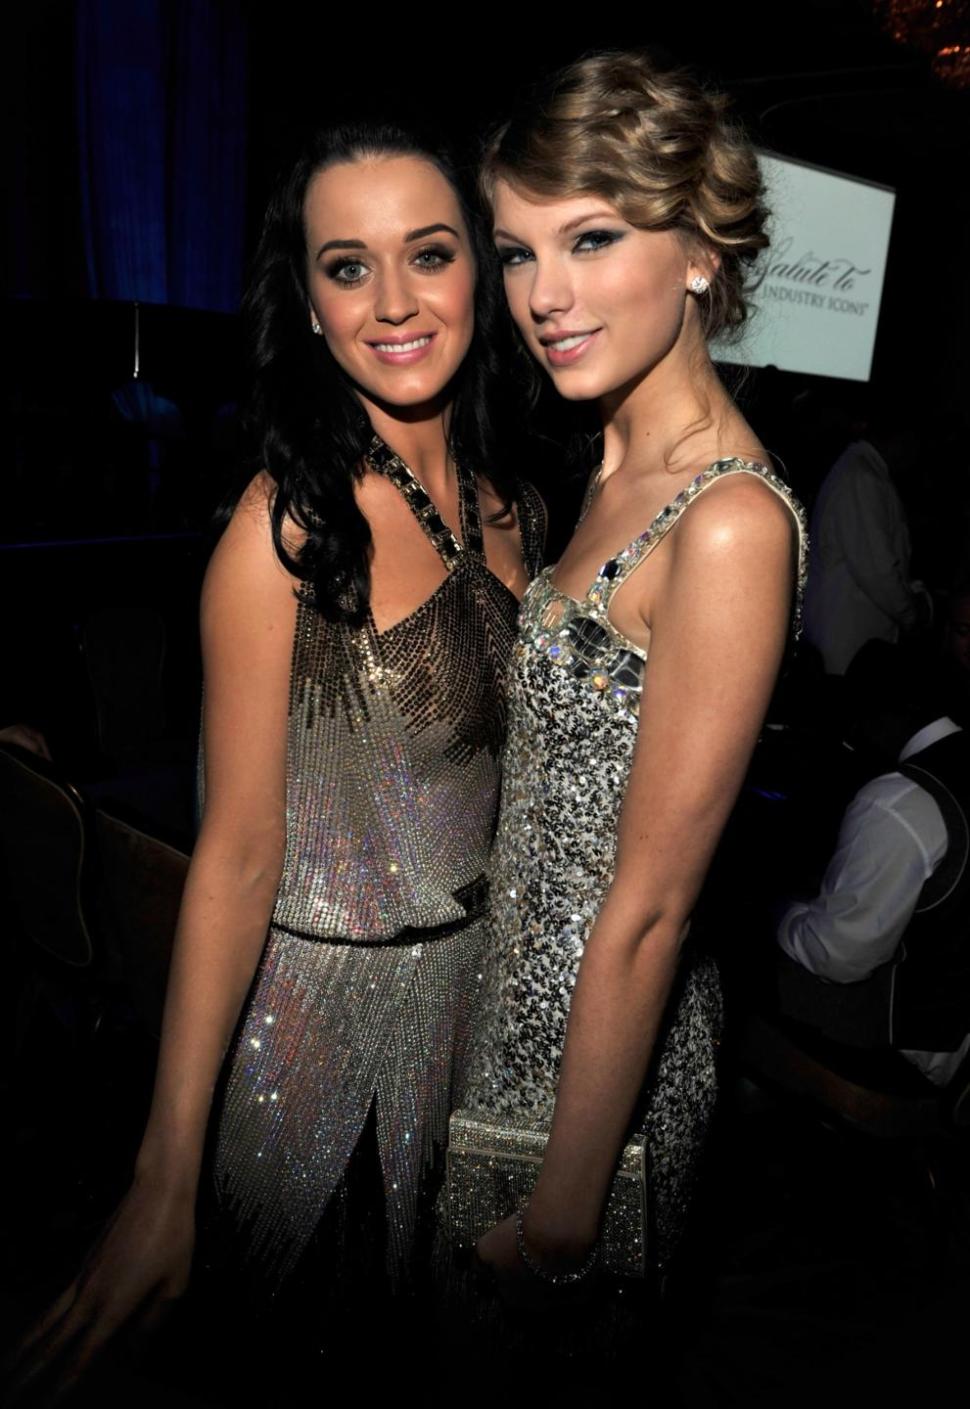 Katy Perry and Taylor Swift at the 52nd Annual GRAMMY Awards in 2010.